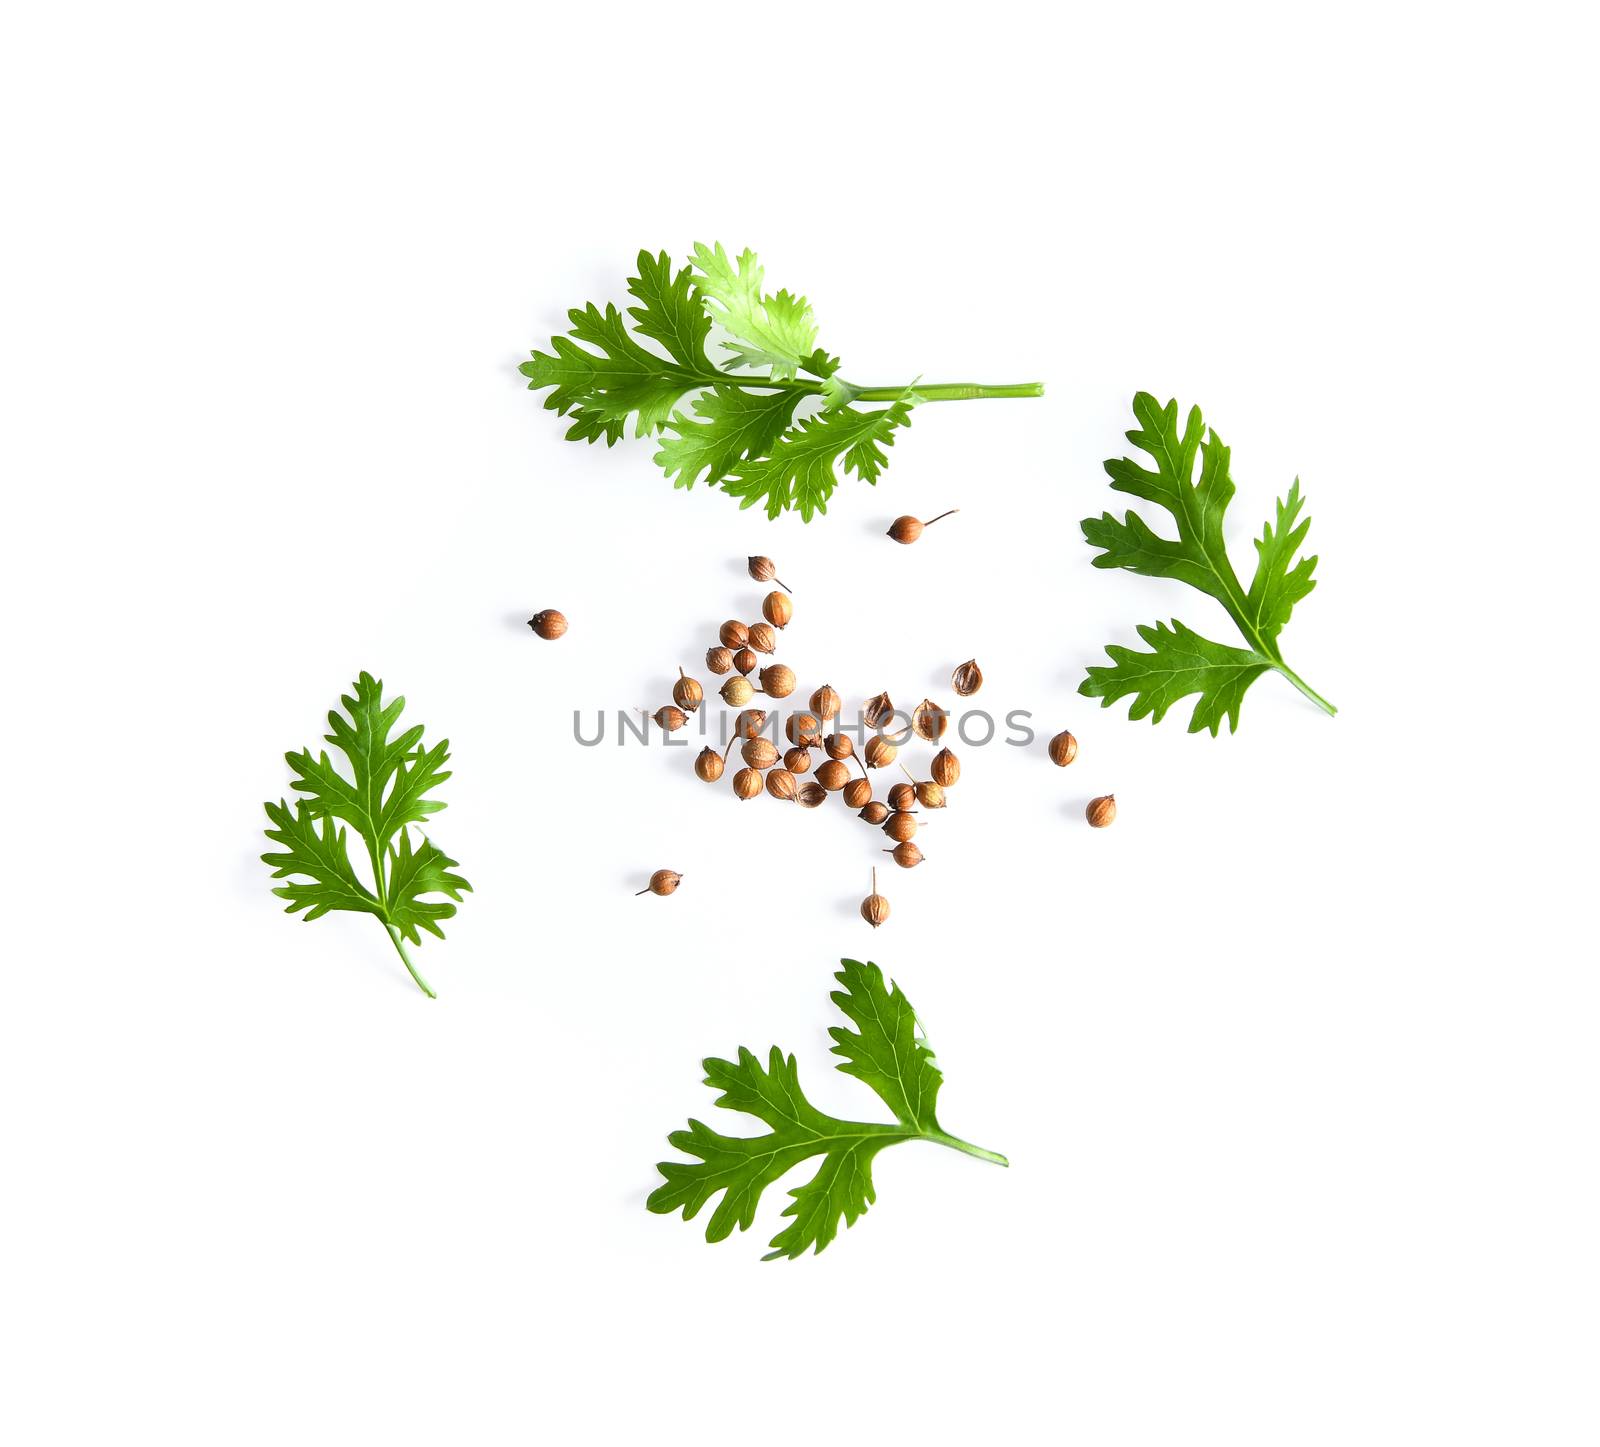 coriander leaf and seeds isolated on white background by sommai